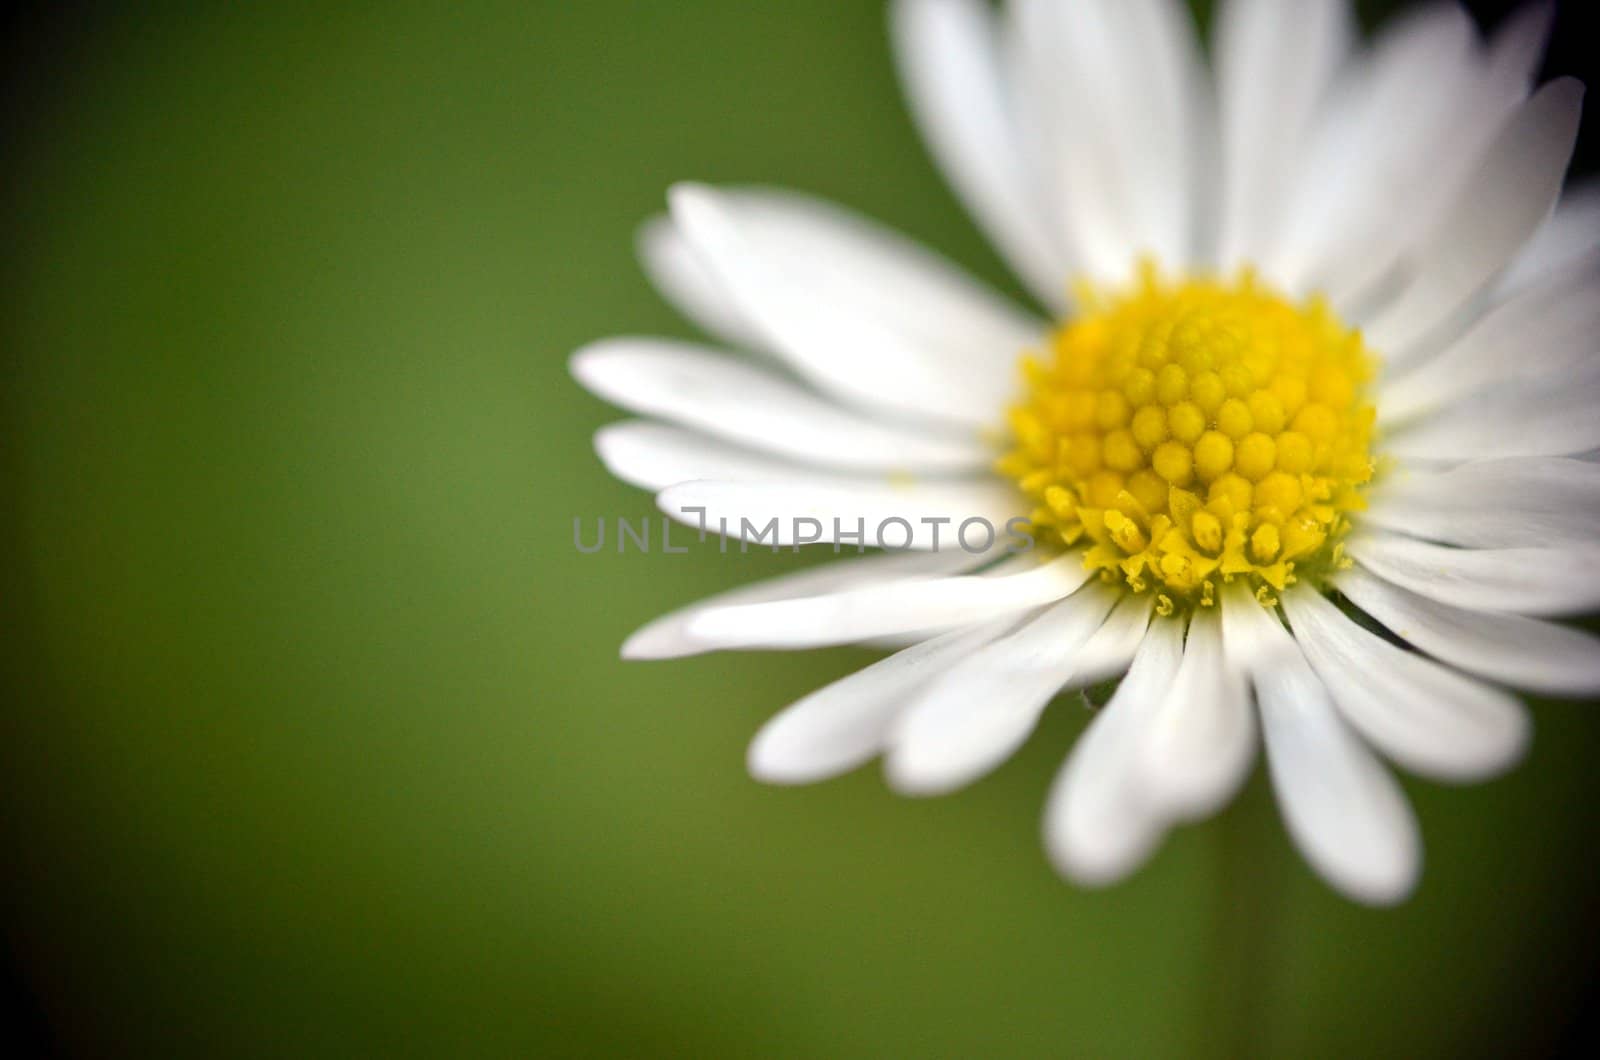 A close up of a common daisy taken in rural England.